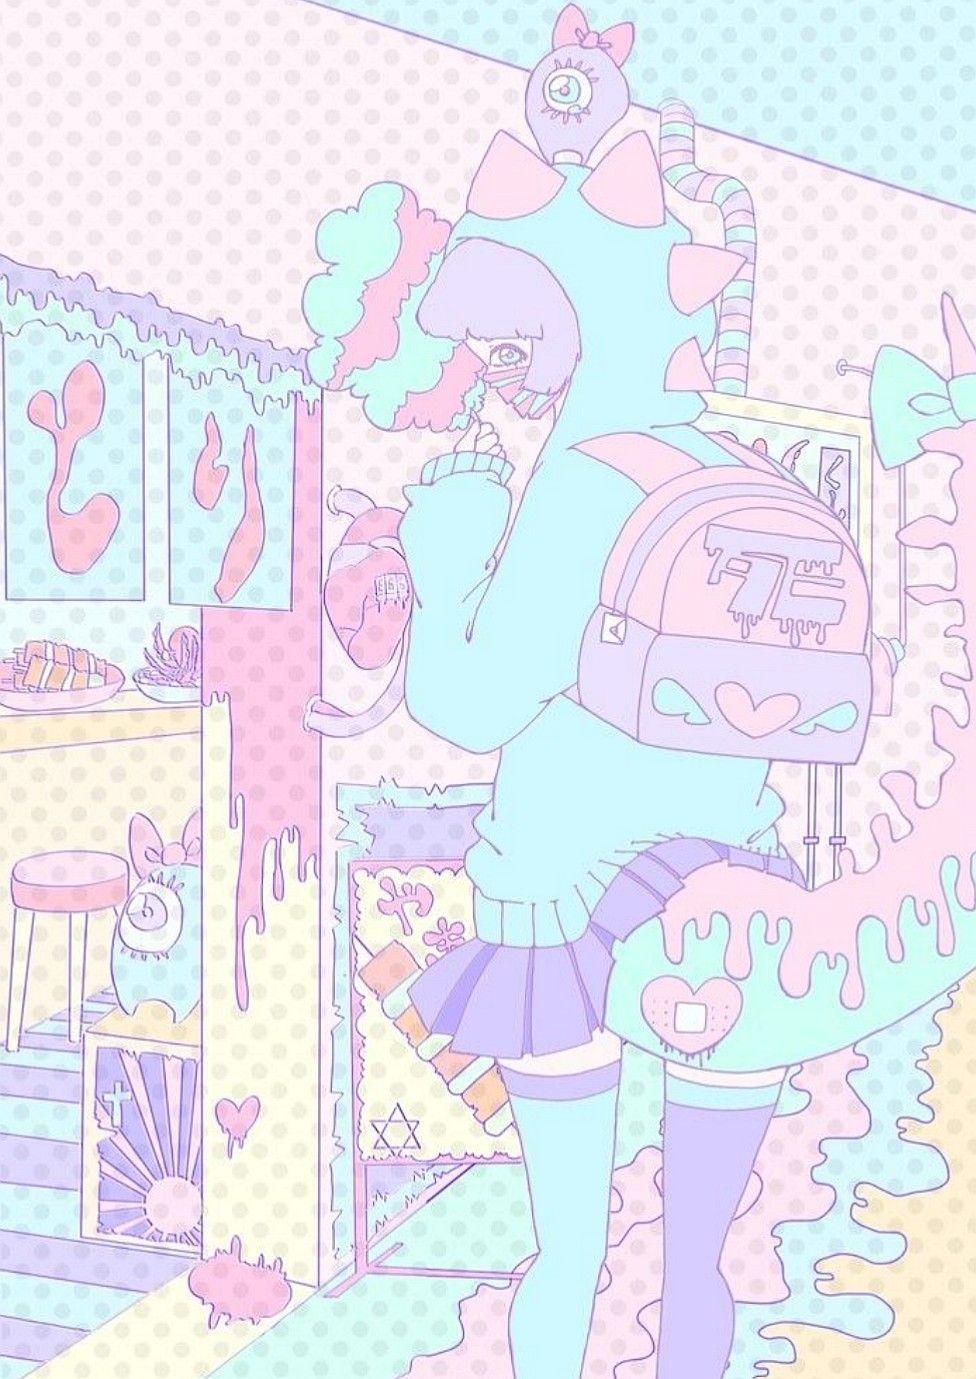 Aesthetic Anime Pastel Wallpapers - Wallpaper Cave